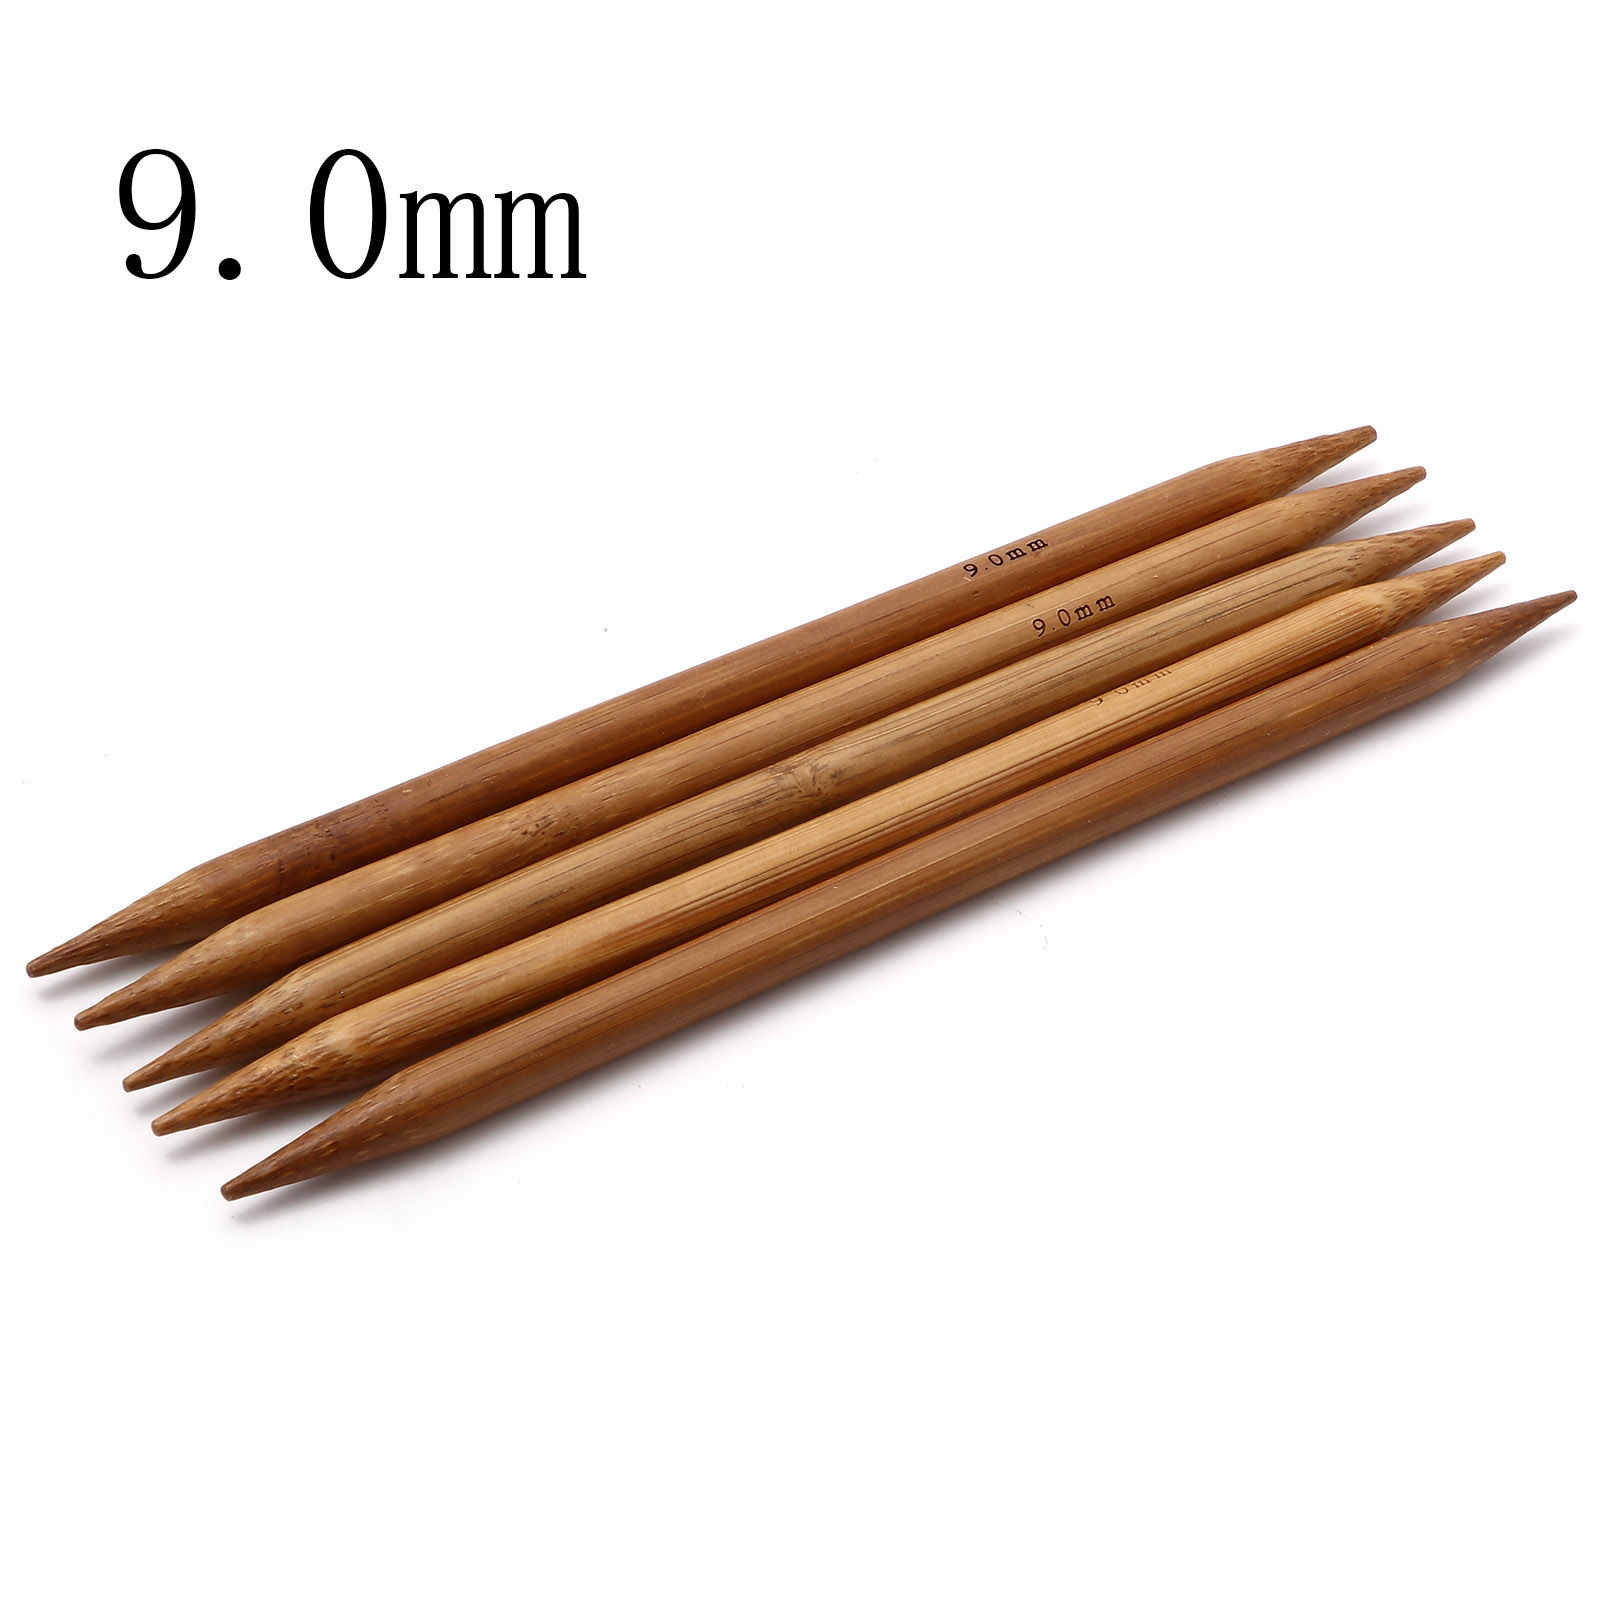 Picture of (US13 9.0mm) Bamboo Double Pointed Knitting Needles Brown 20cm(7 7/8") long, 5 PCs